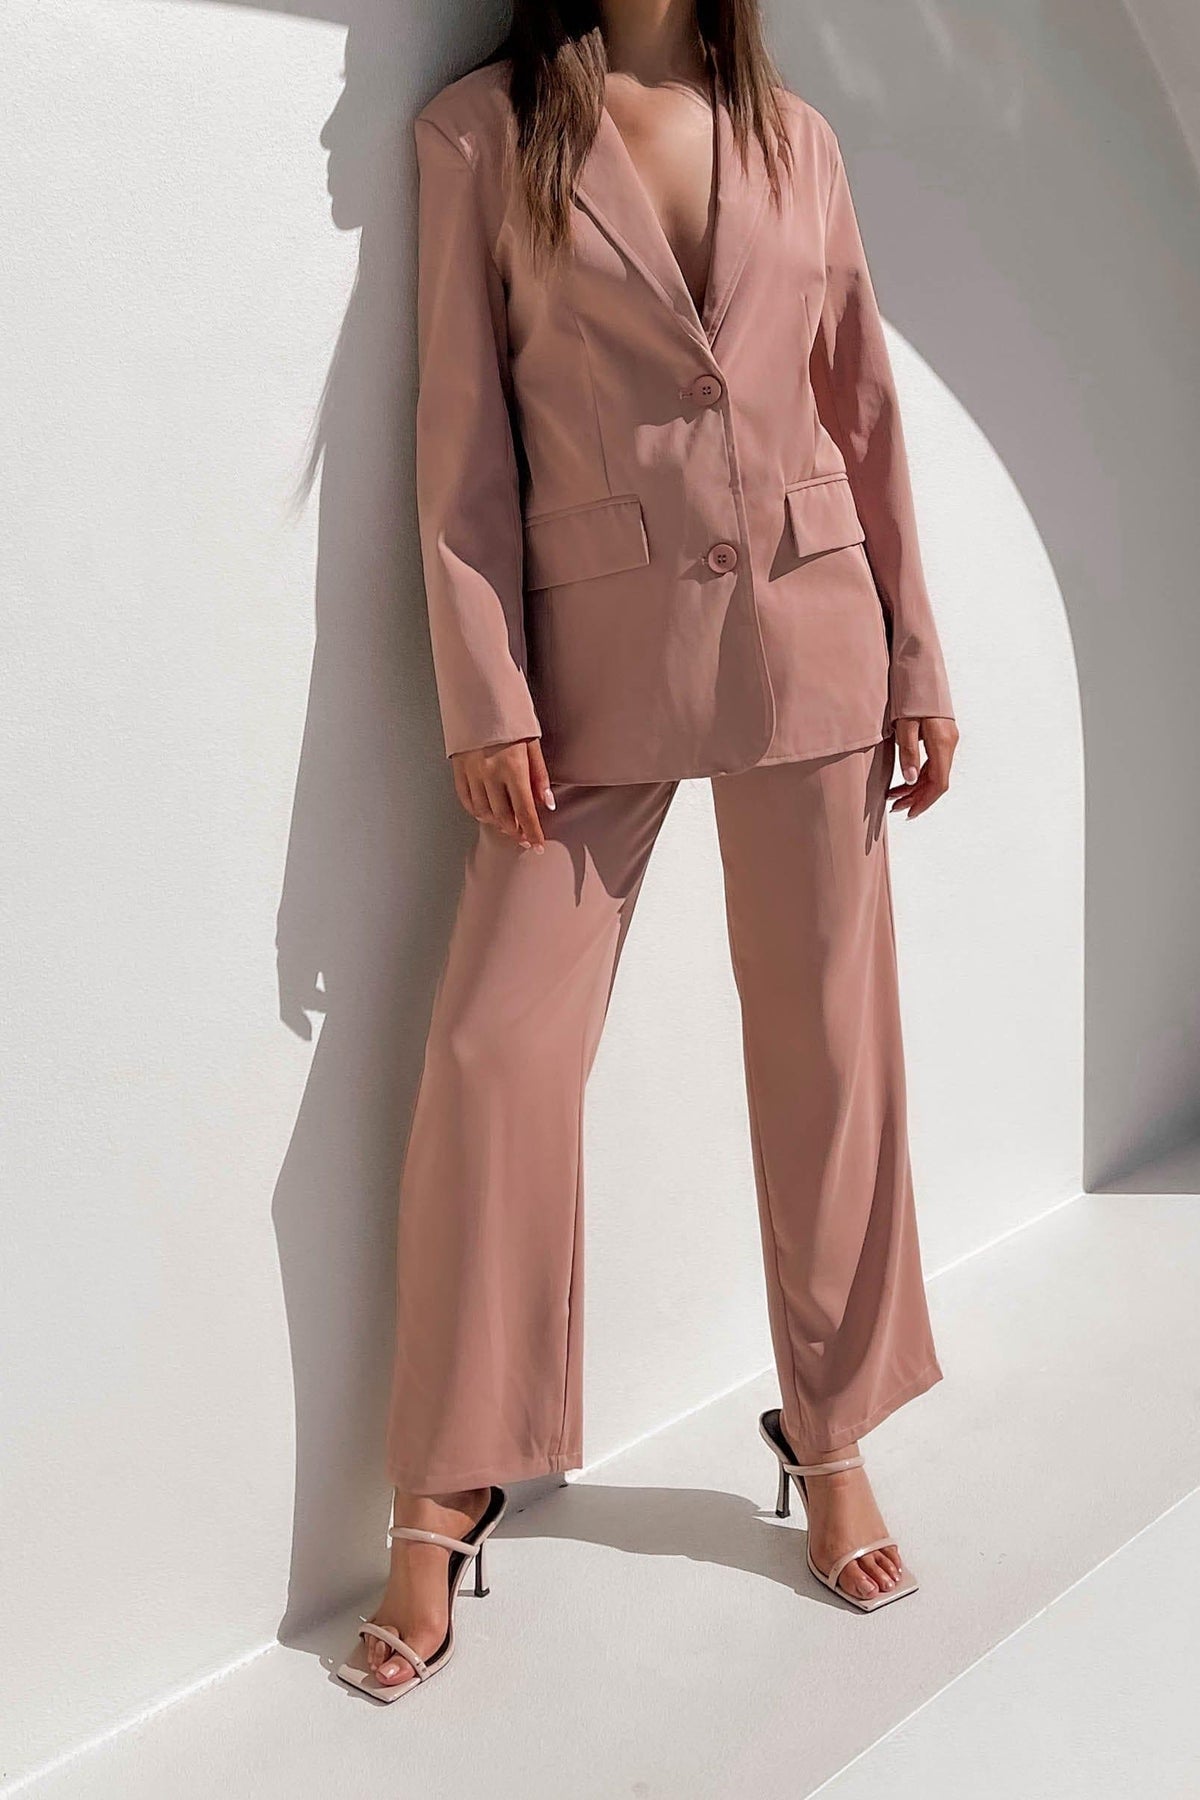 Faris Pants, BEIGE, BLAZER, BOTTOMS, JACKETS, LONG SLEEVE, PANTS, PINK, POLYESTER, SETS, , Our New Faris Pants is only $65.00-We Have The Latest Pants | Shorts | Skirts @ Mishkah Online Fashion Boutique-MISHKAH